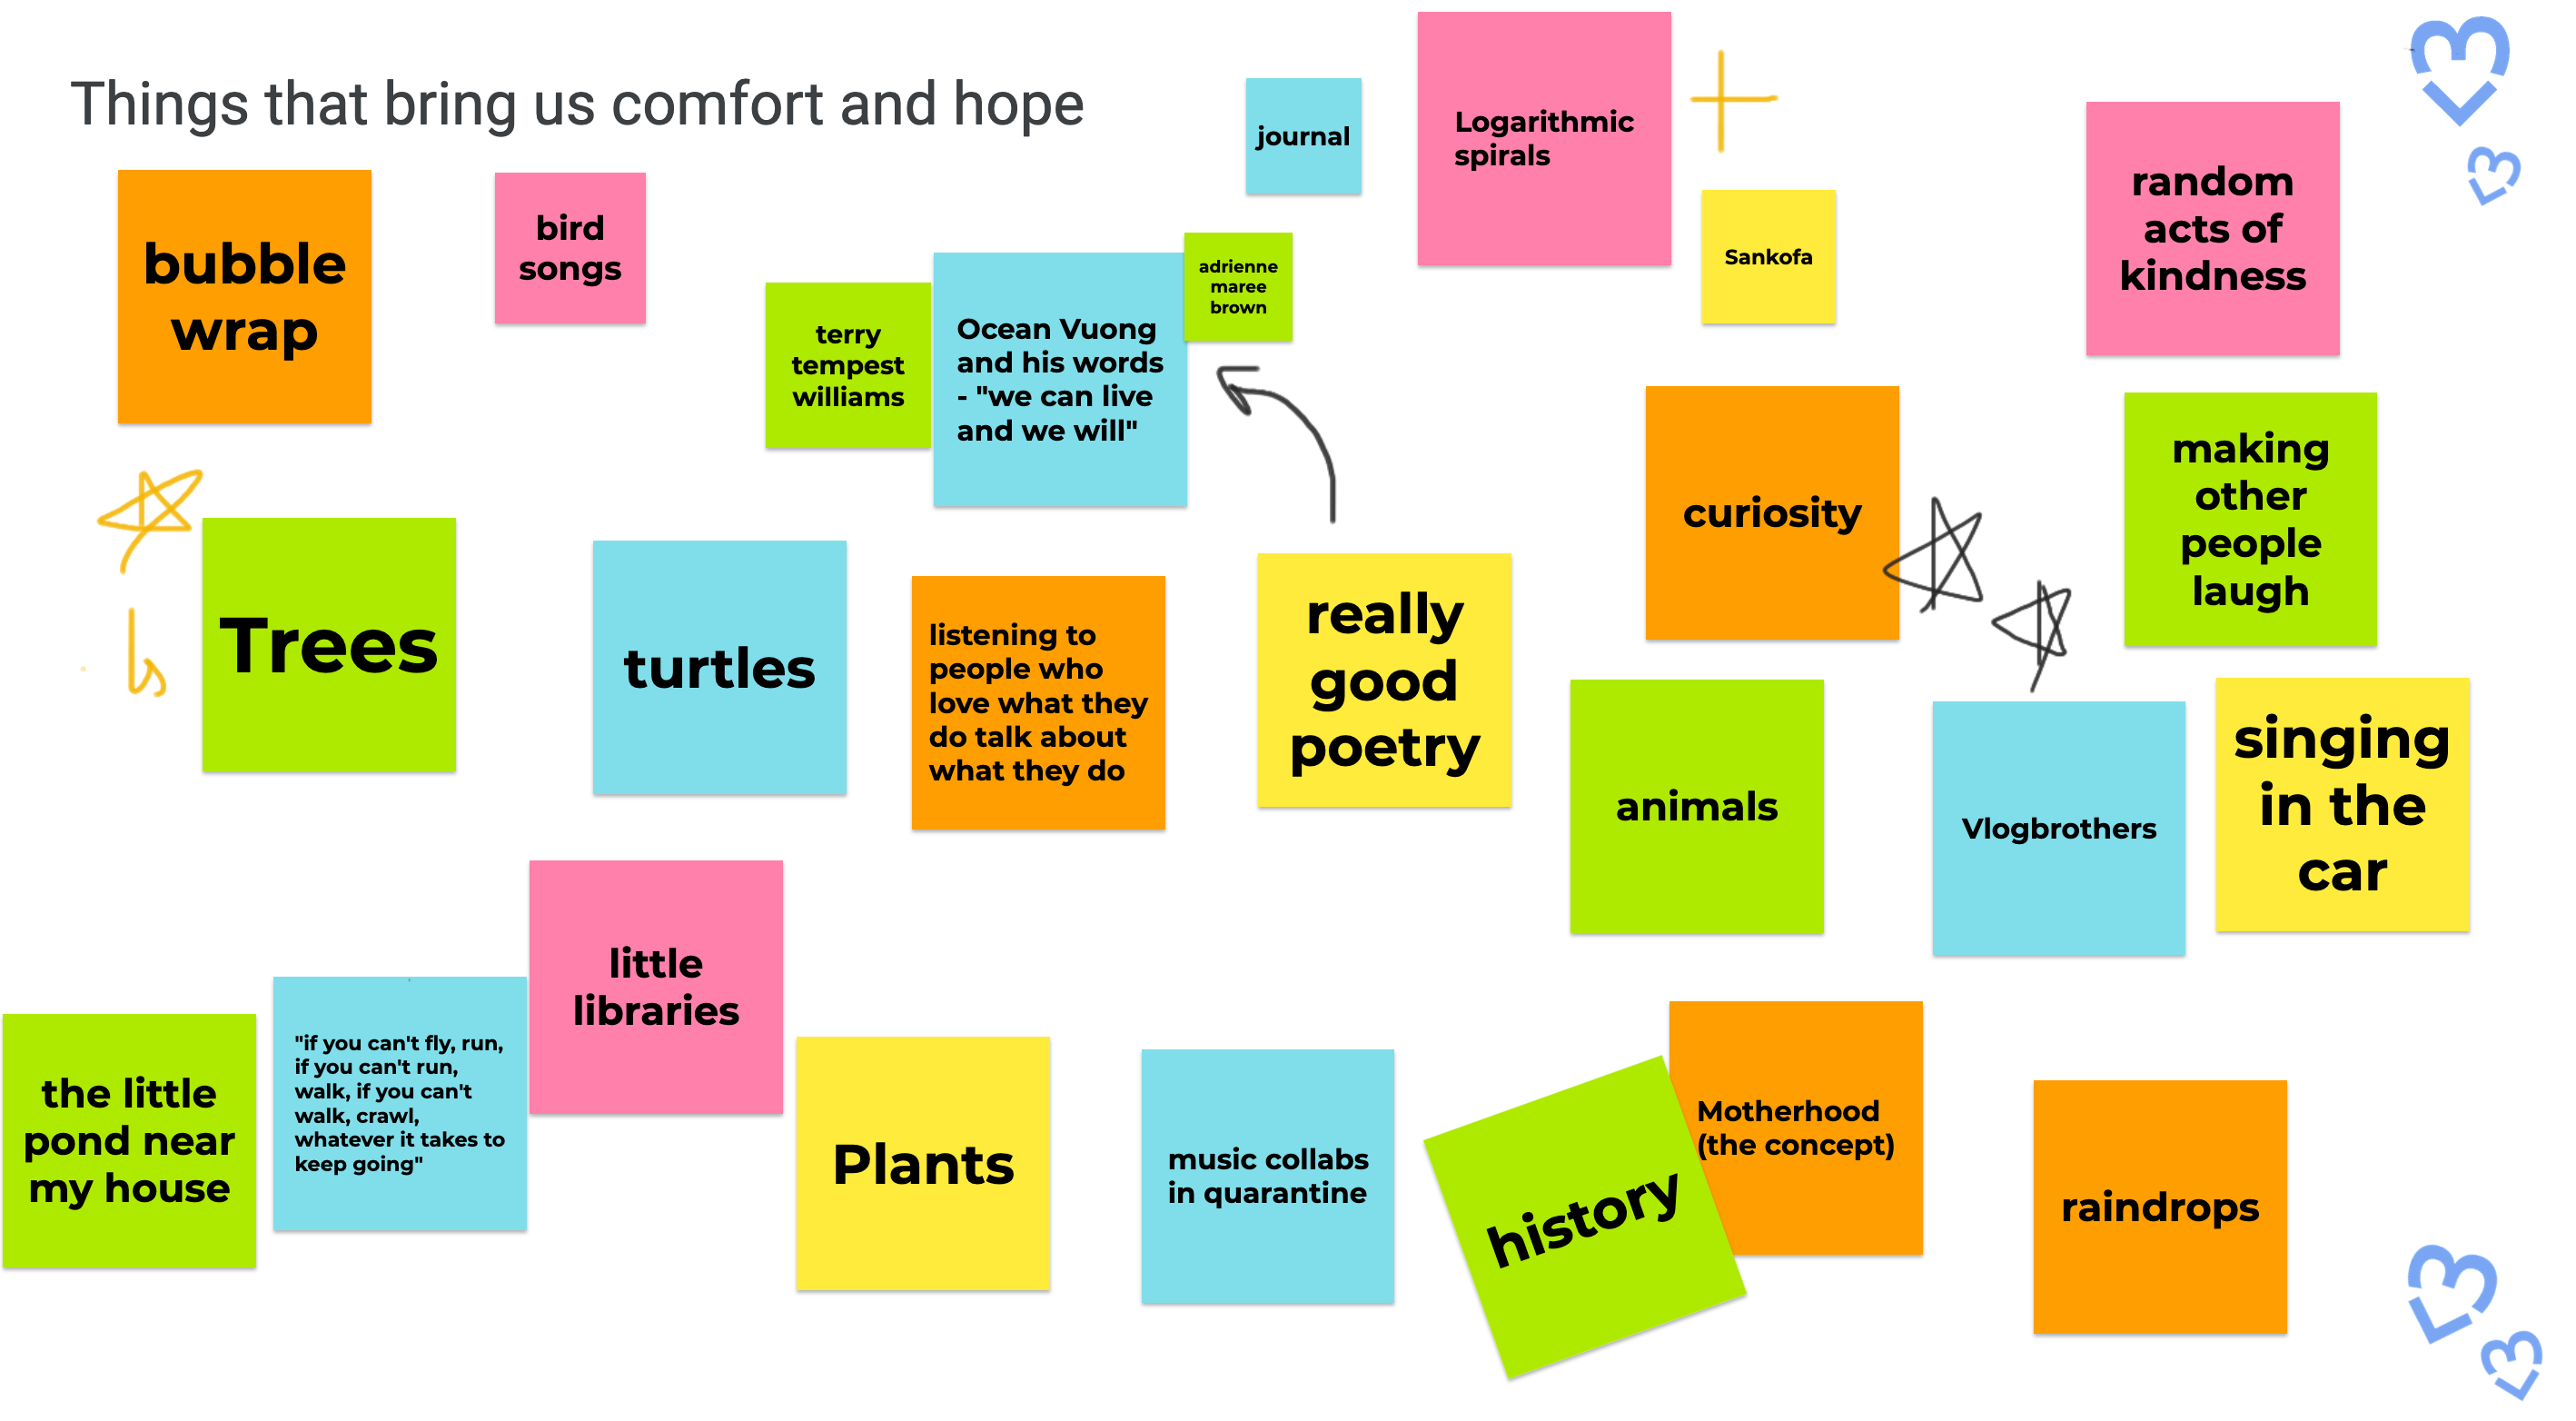 Jamboard showing some of the things that gives us hope, including: trees, log spirals, random act of kindness, turtles, and so on.